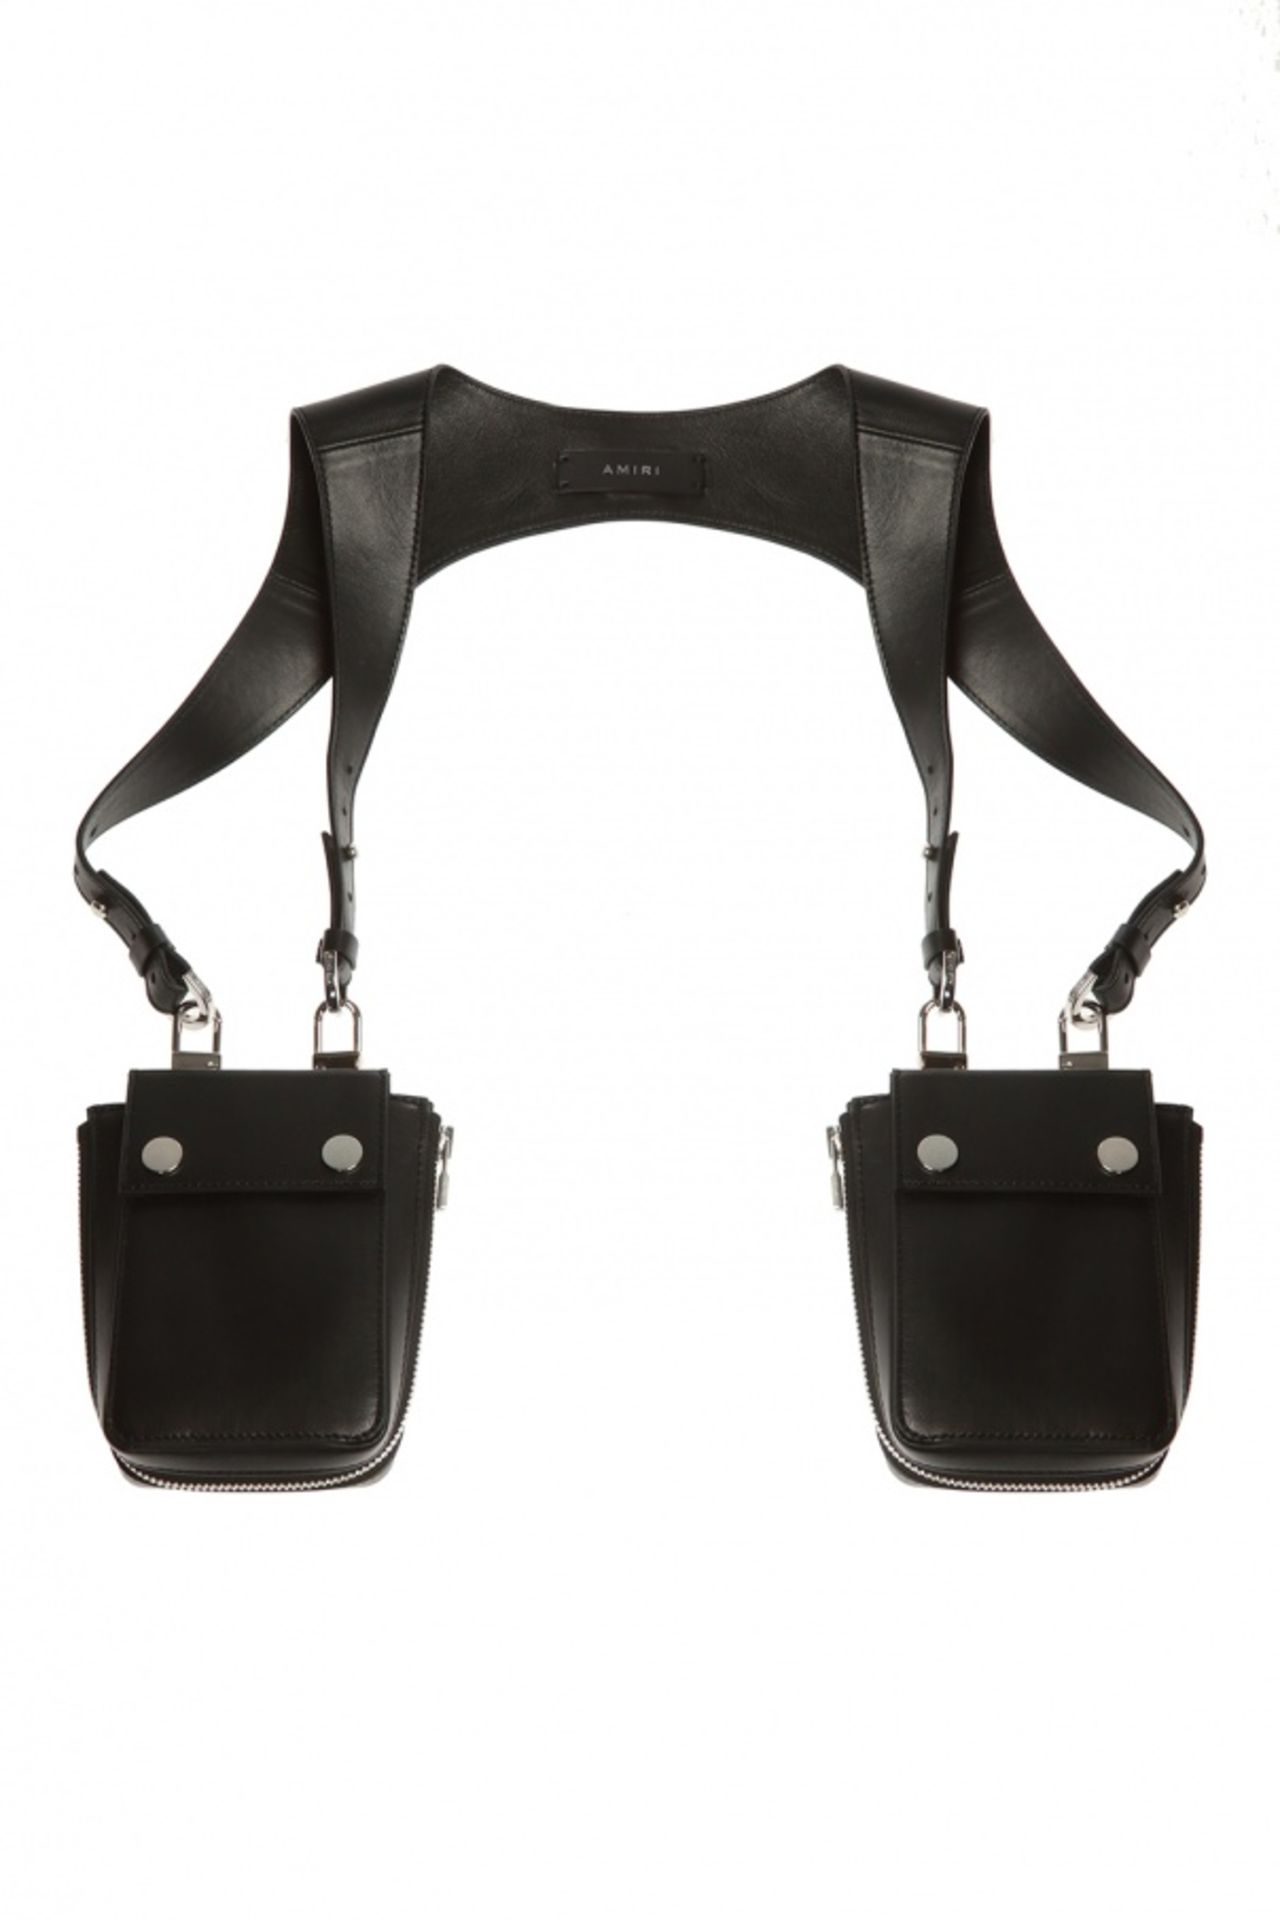 AMIRI HARNESS WITH POUCHES. RRP £955.00. Black harness with pouches from Amiri. Made of calf